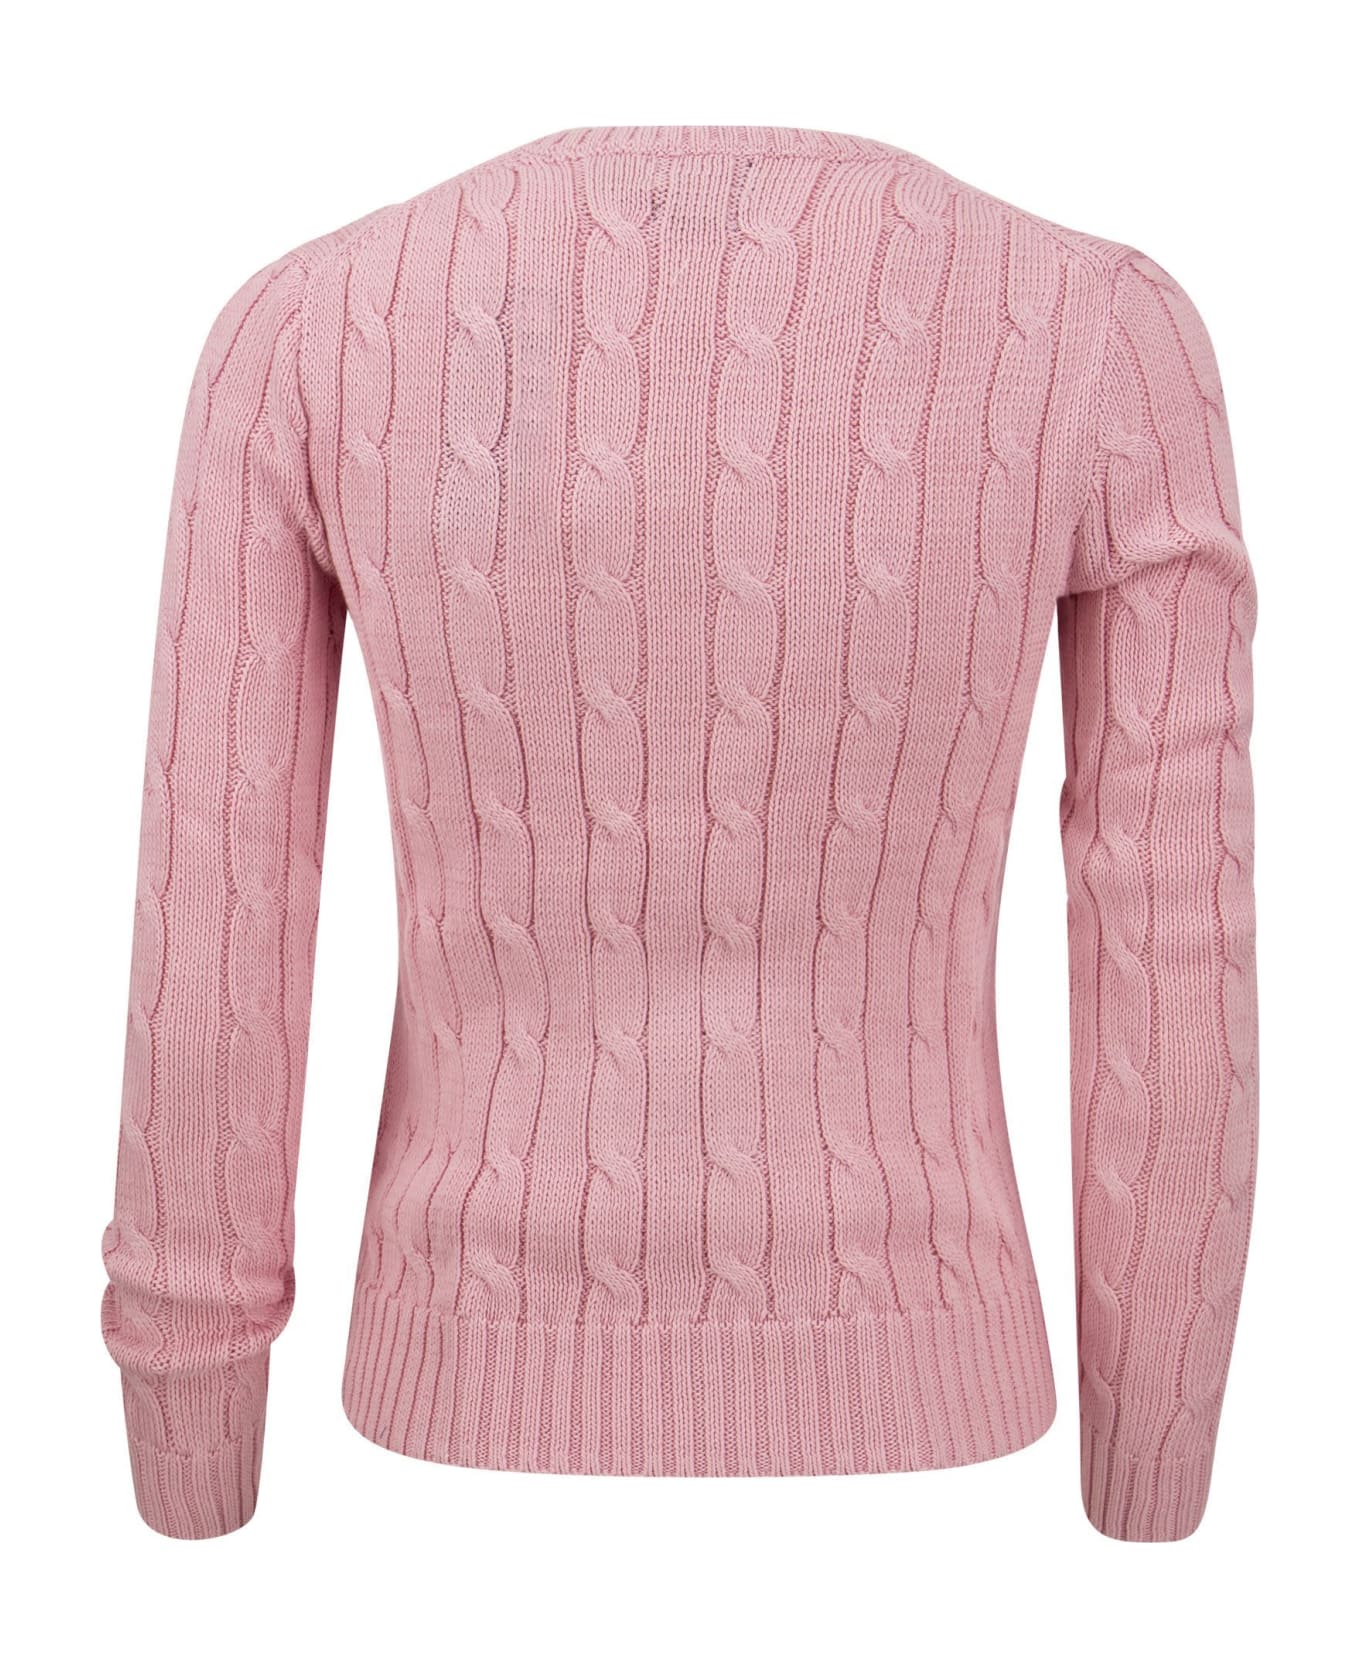 Polo Ralph Lauren Sweater With Pony - Pink ニットウェア